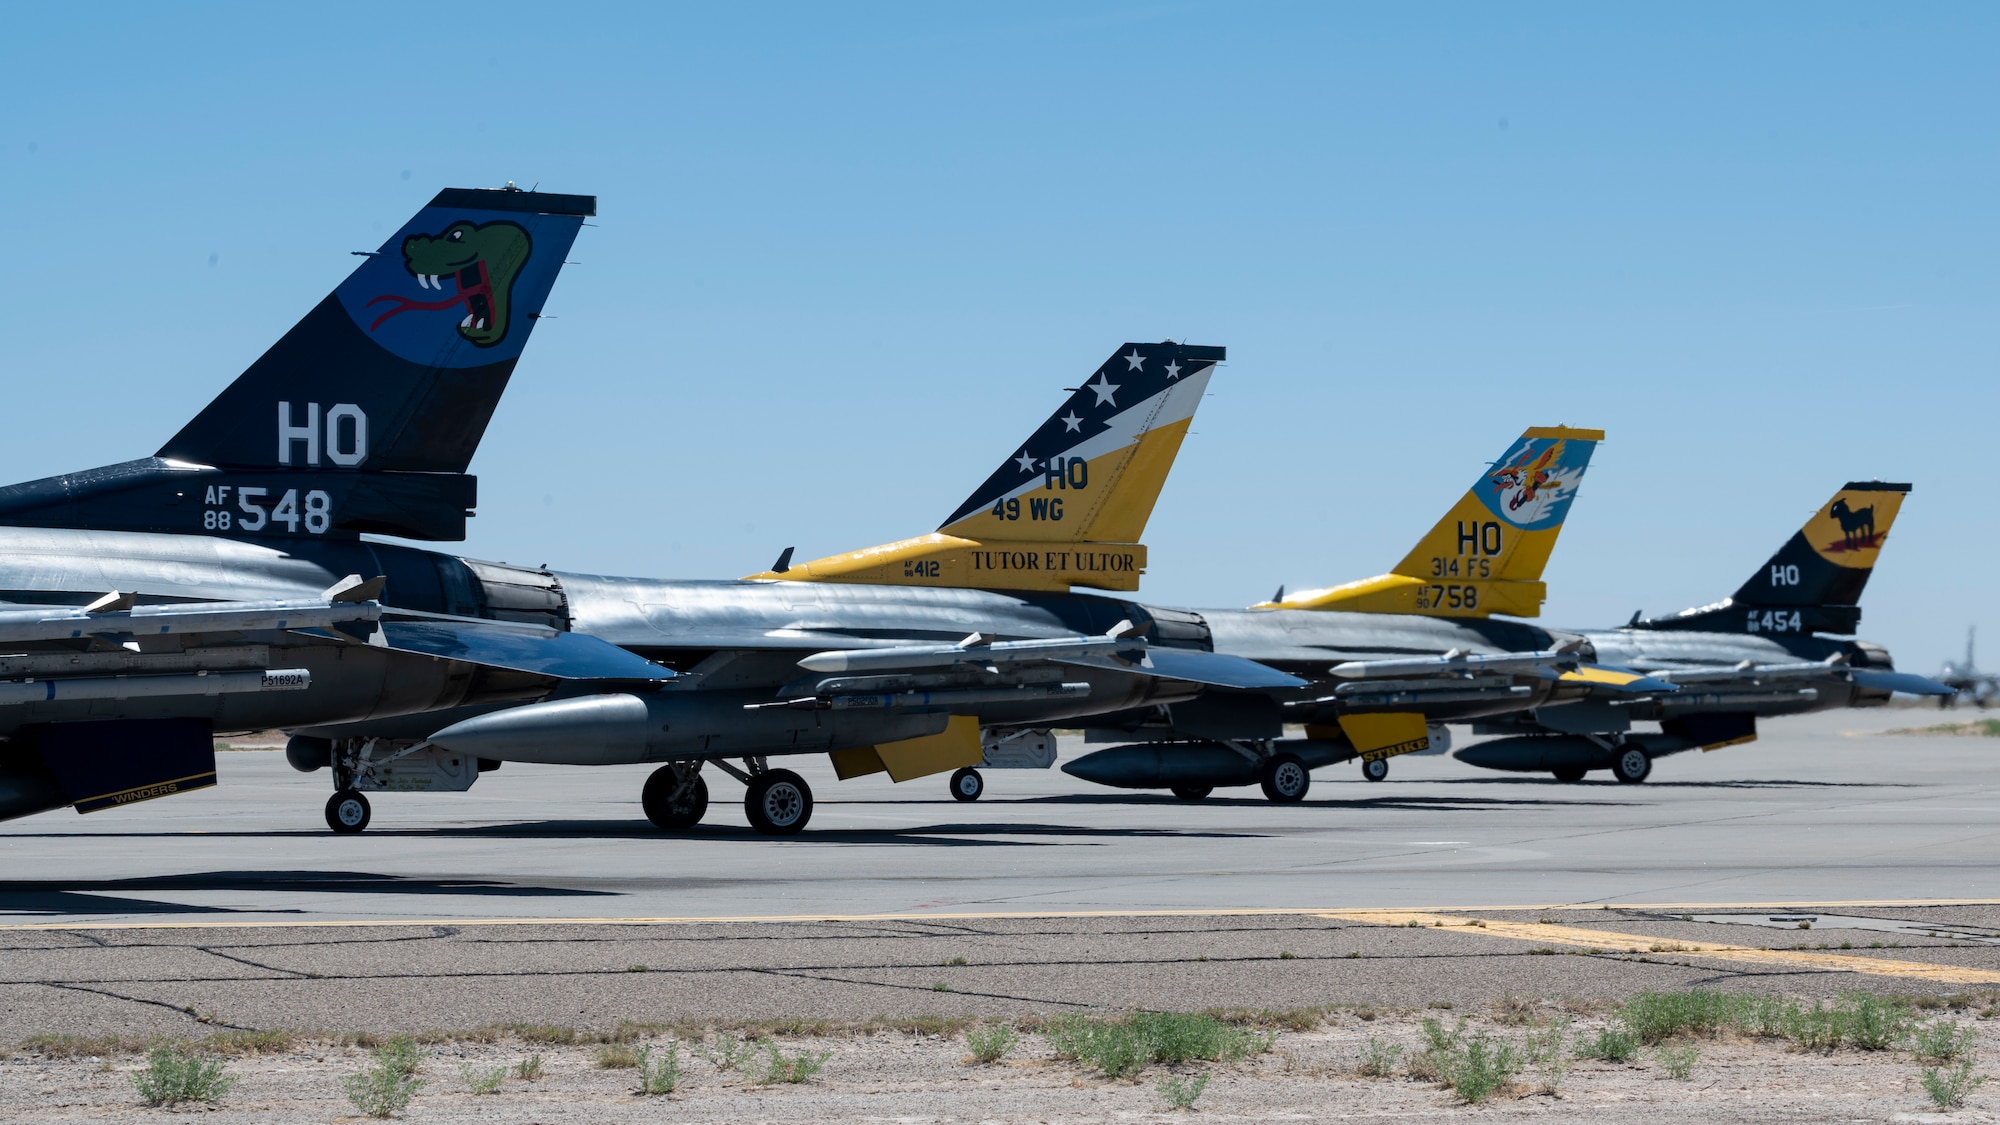 The 311th Fighter Squadron, 8th FS, 314th FS and 49th Wing flagships sit on a runway during an elephant walk at Holloman Air Force Base, New Mexico, April 21, 2023.